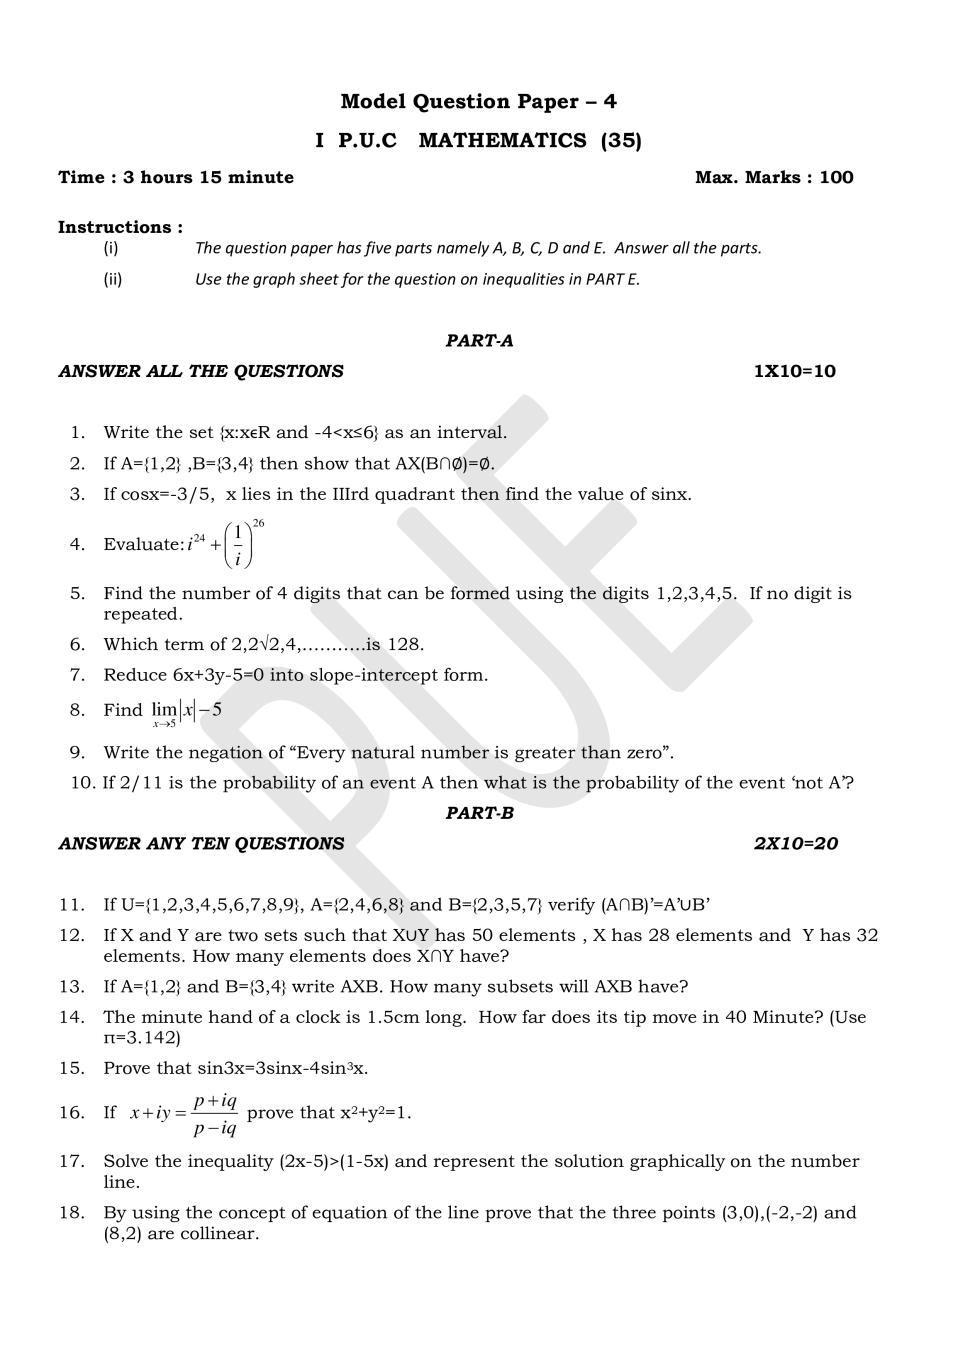 Karnataka 1st PUC Model Question Paper for Maths Set 4 - Page 1